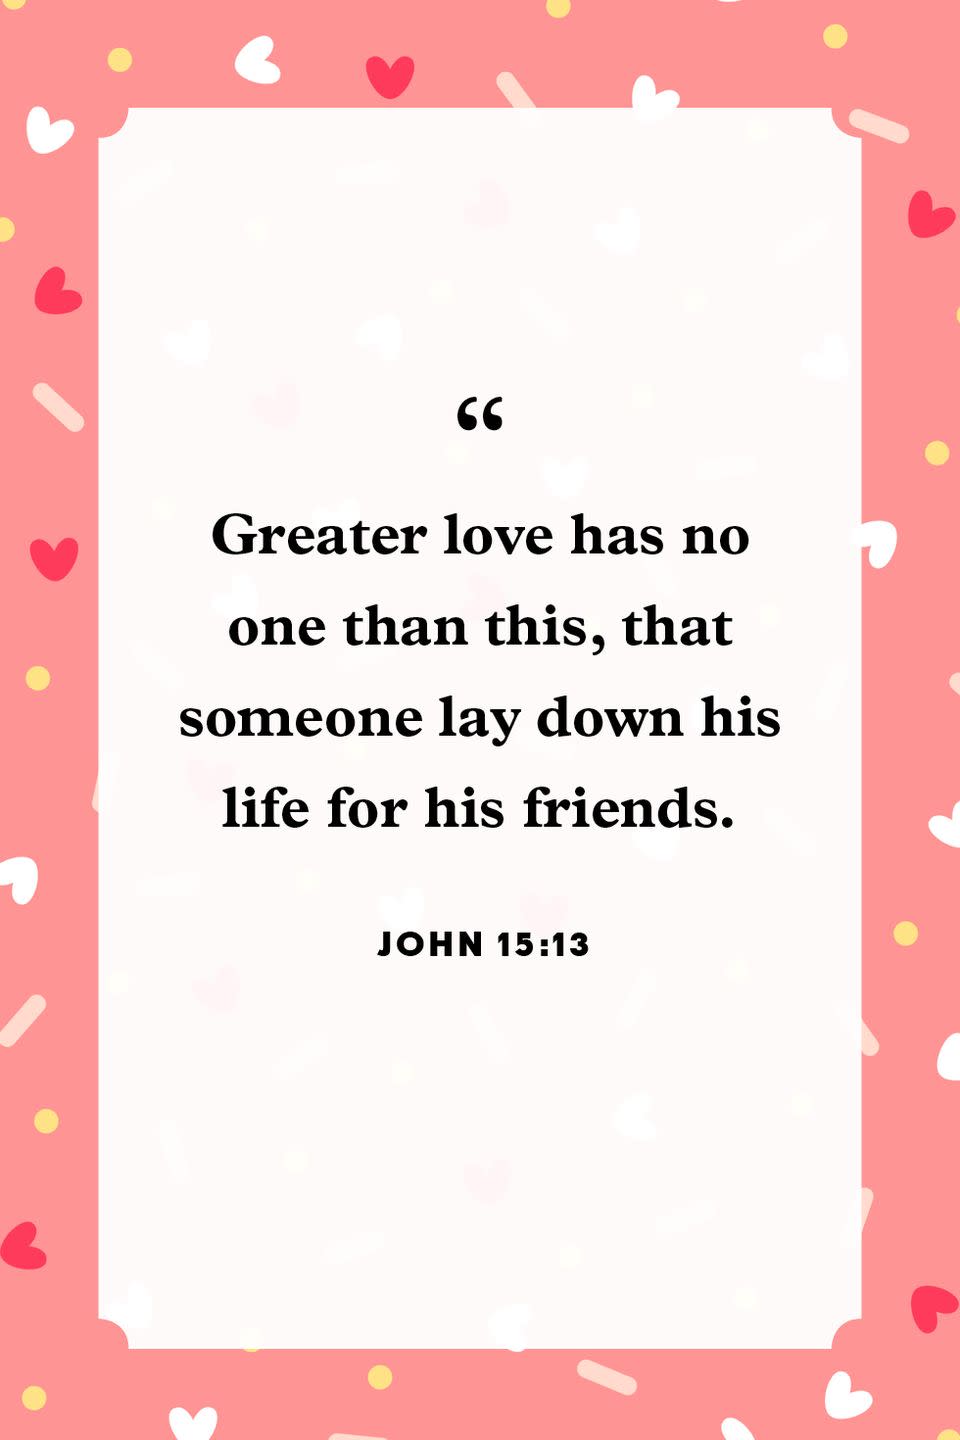 <p>"Greater love has no one than this, that someone lay down his life for his friends."</p>